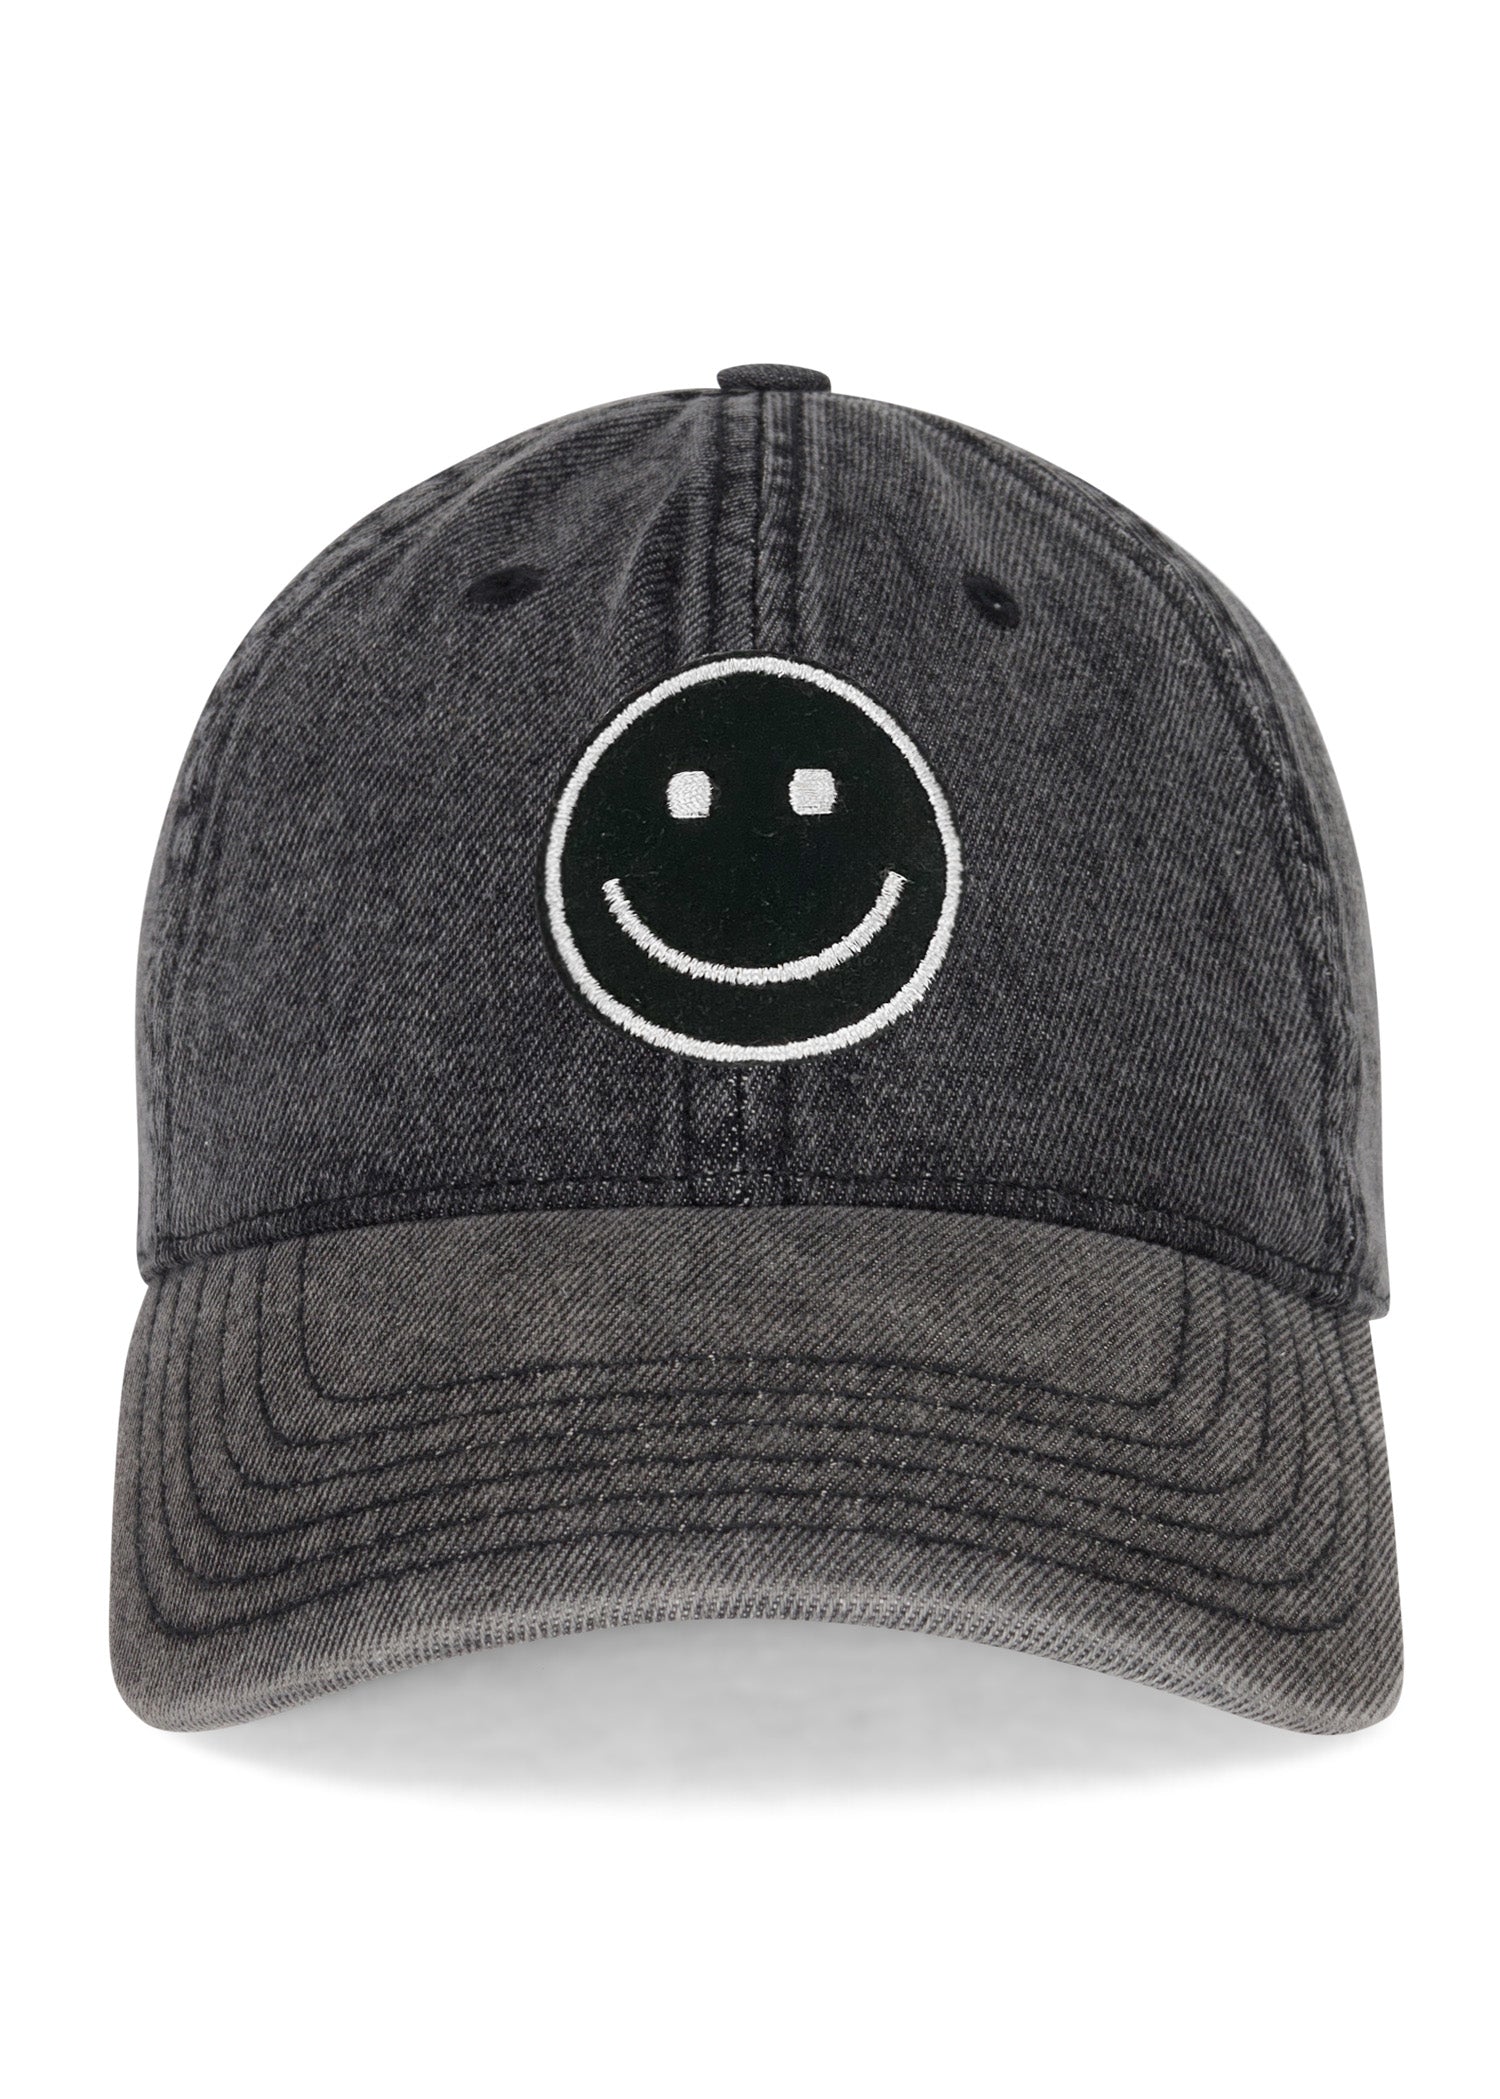 Reina Silver Smiley Patch